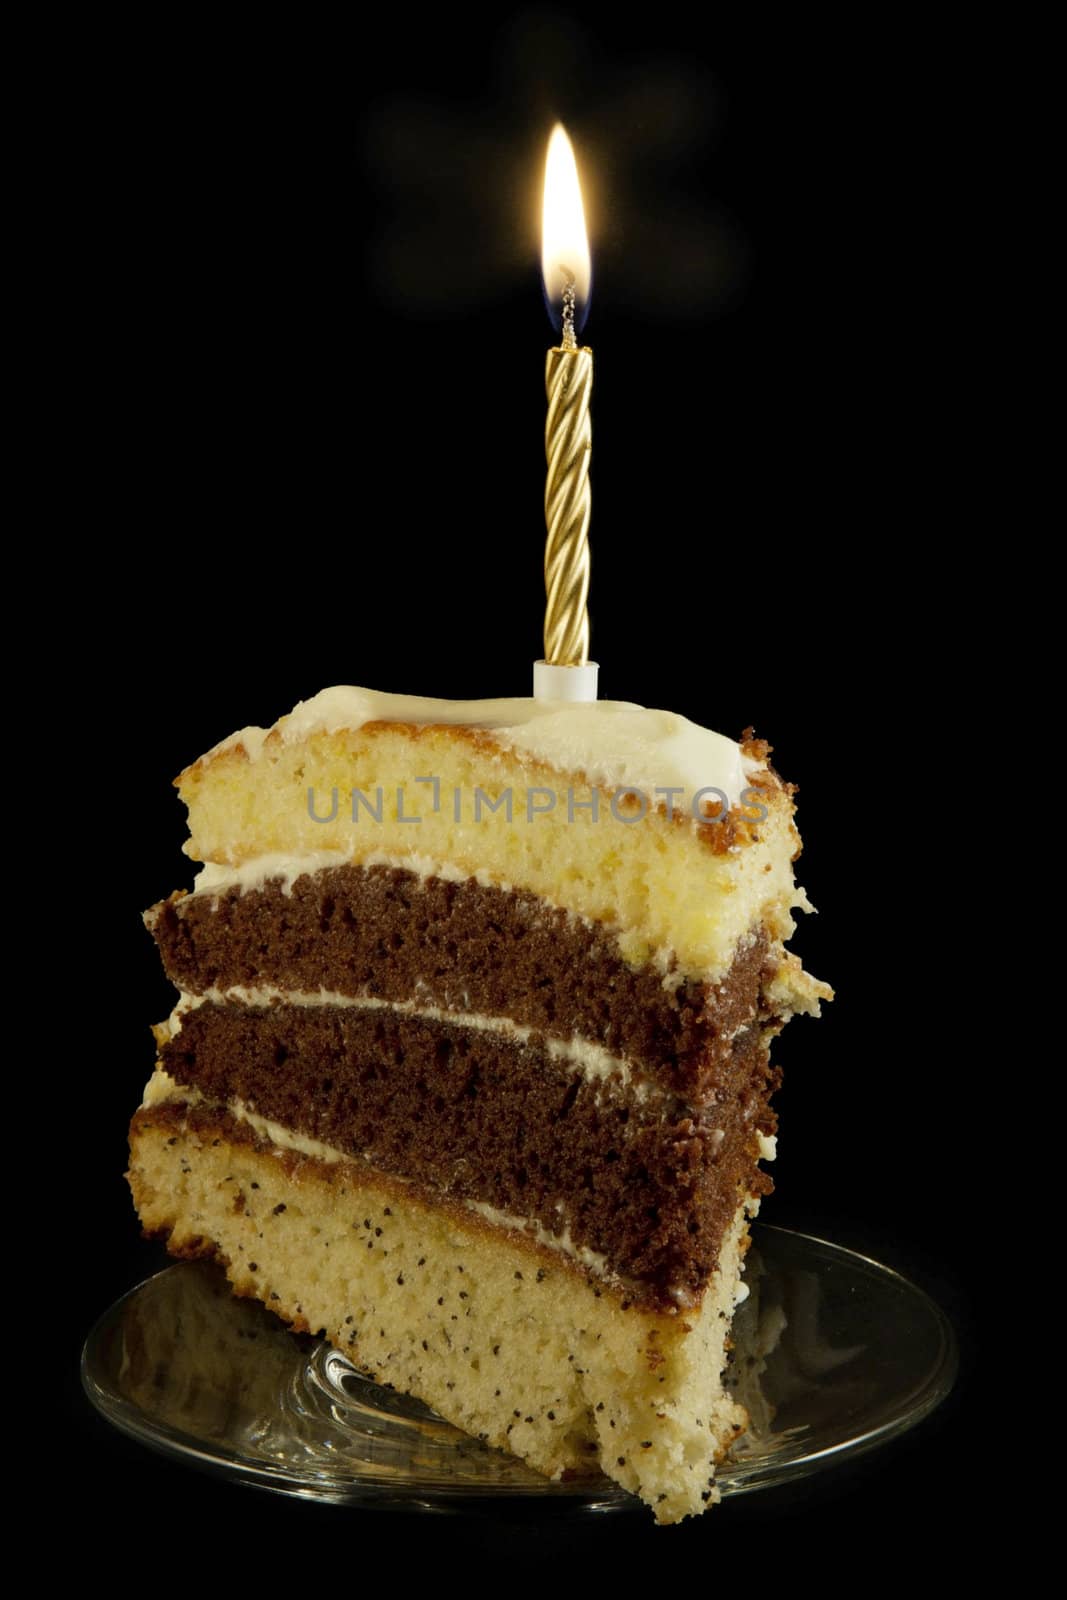 birthday cake with candle by esterio